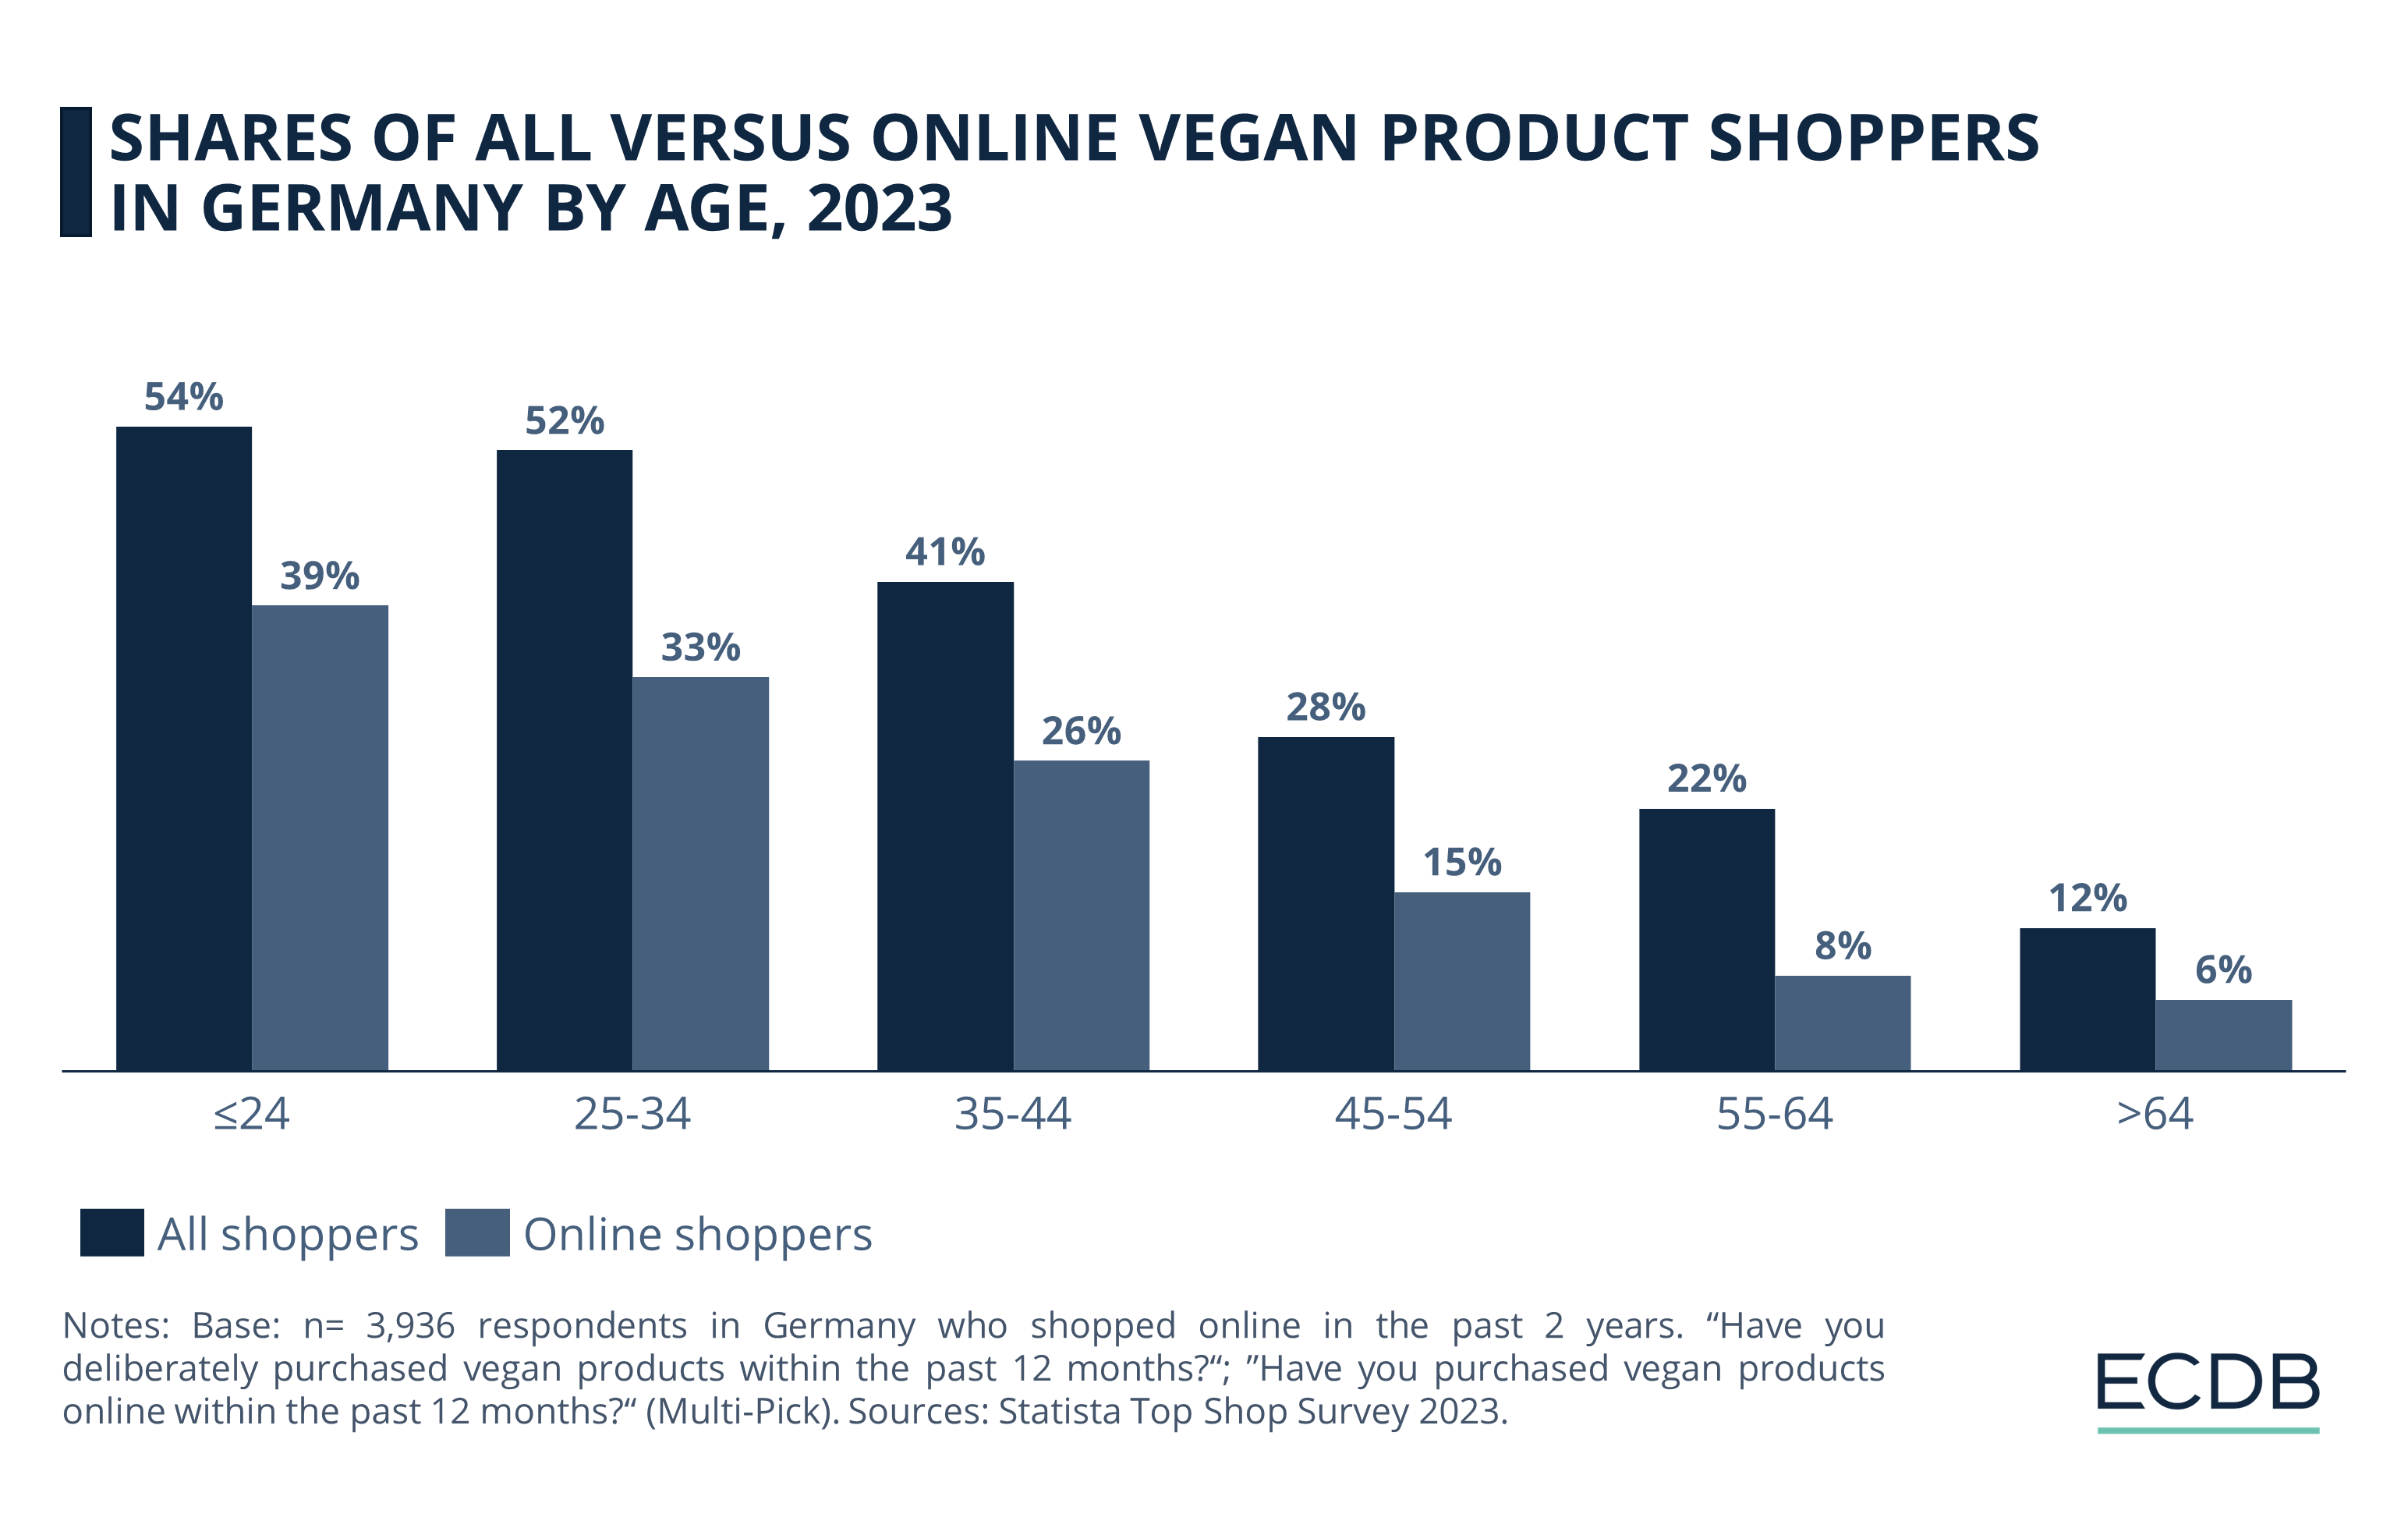 Shares of All Versus Online Vegan Product Shoppers in Germany by Age, 2023